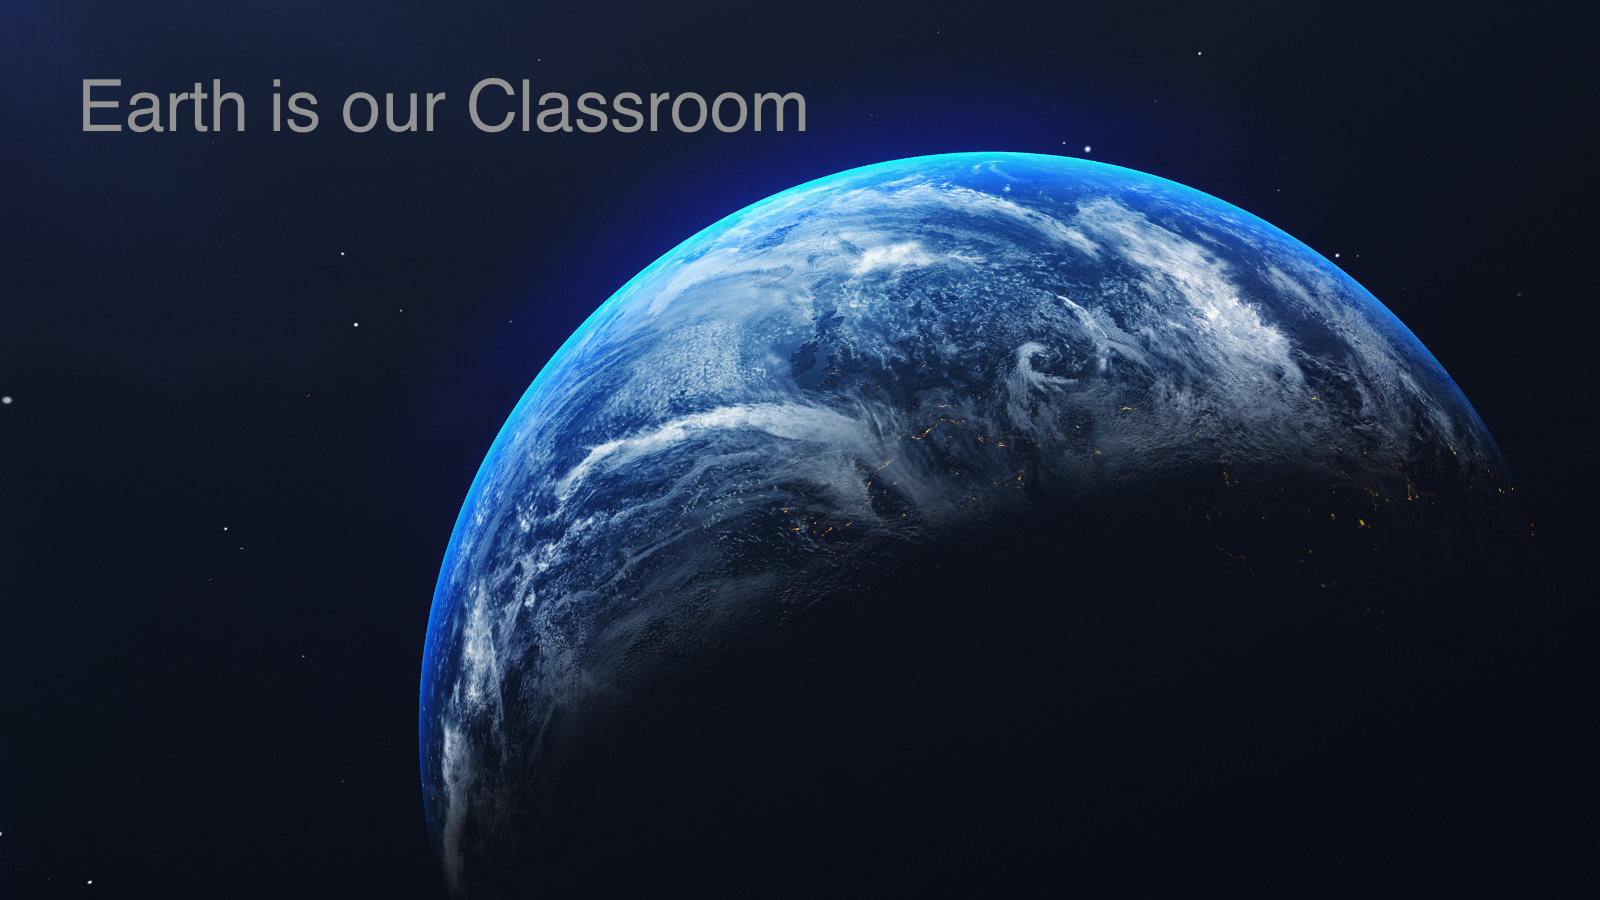 Earth is our classroom